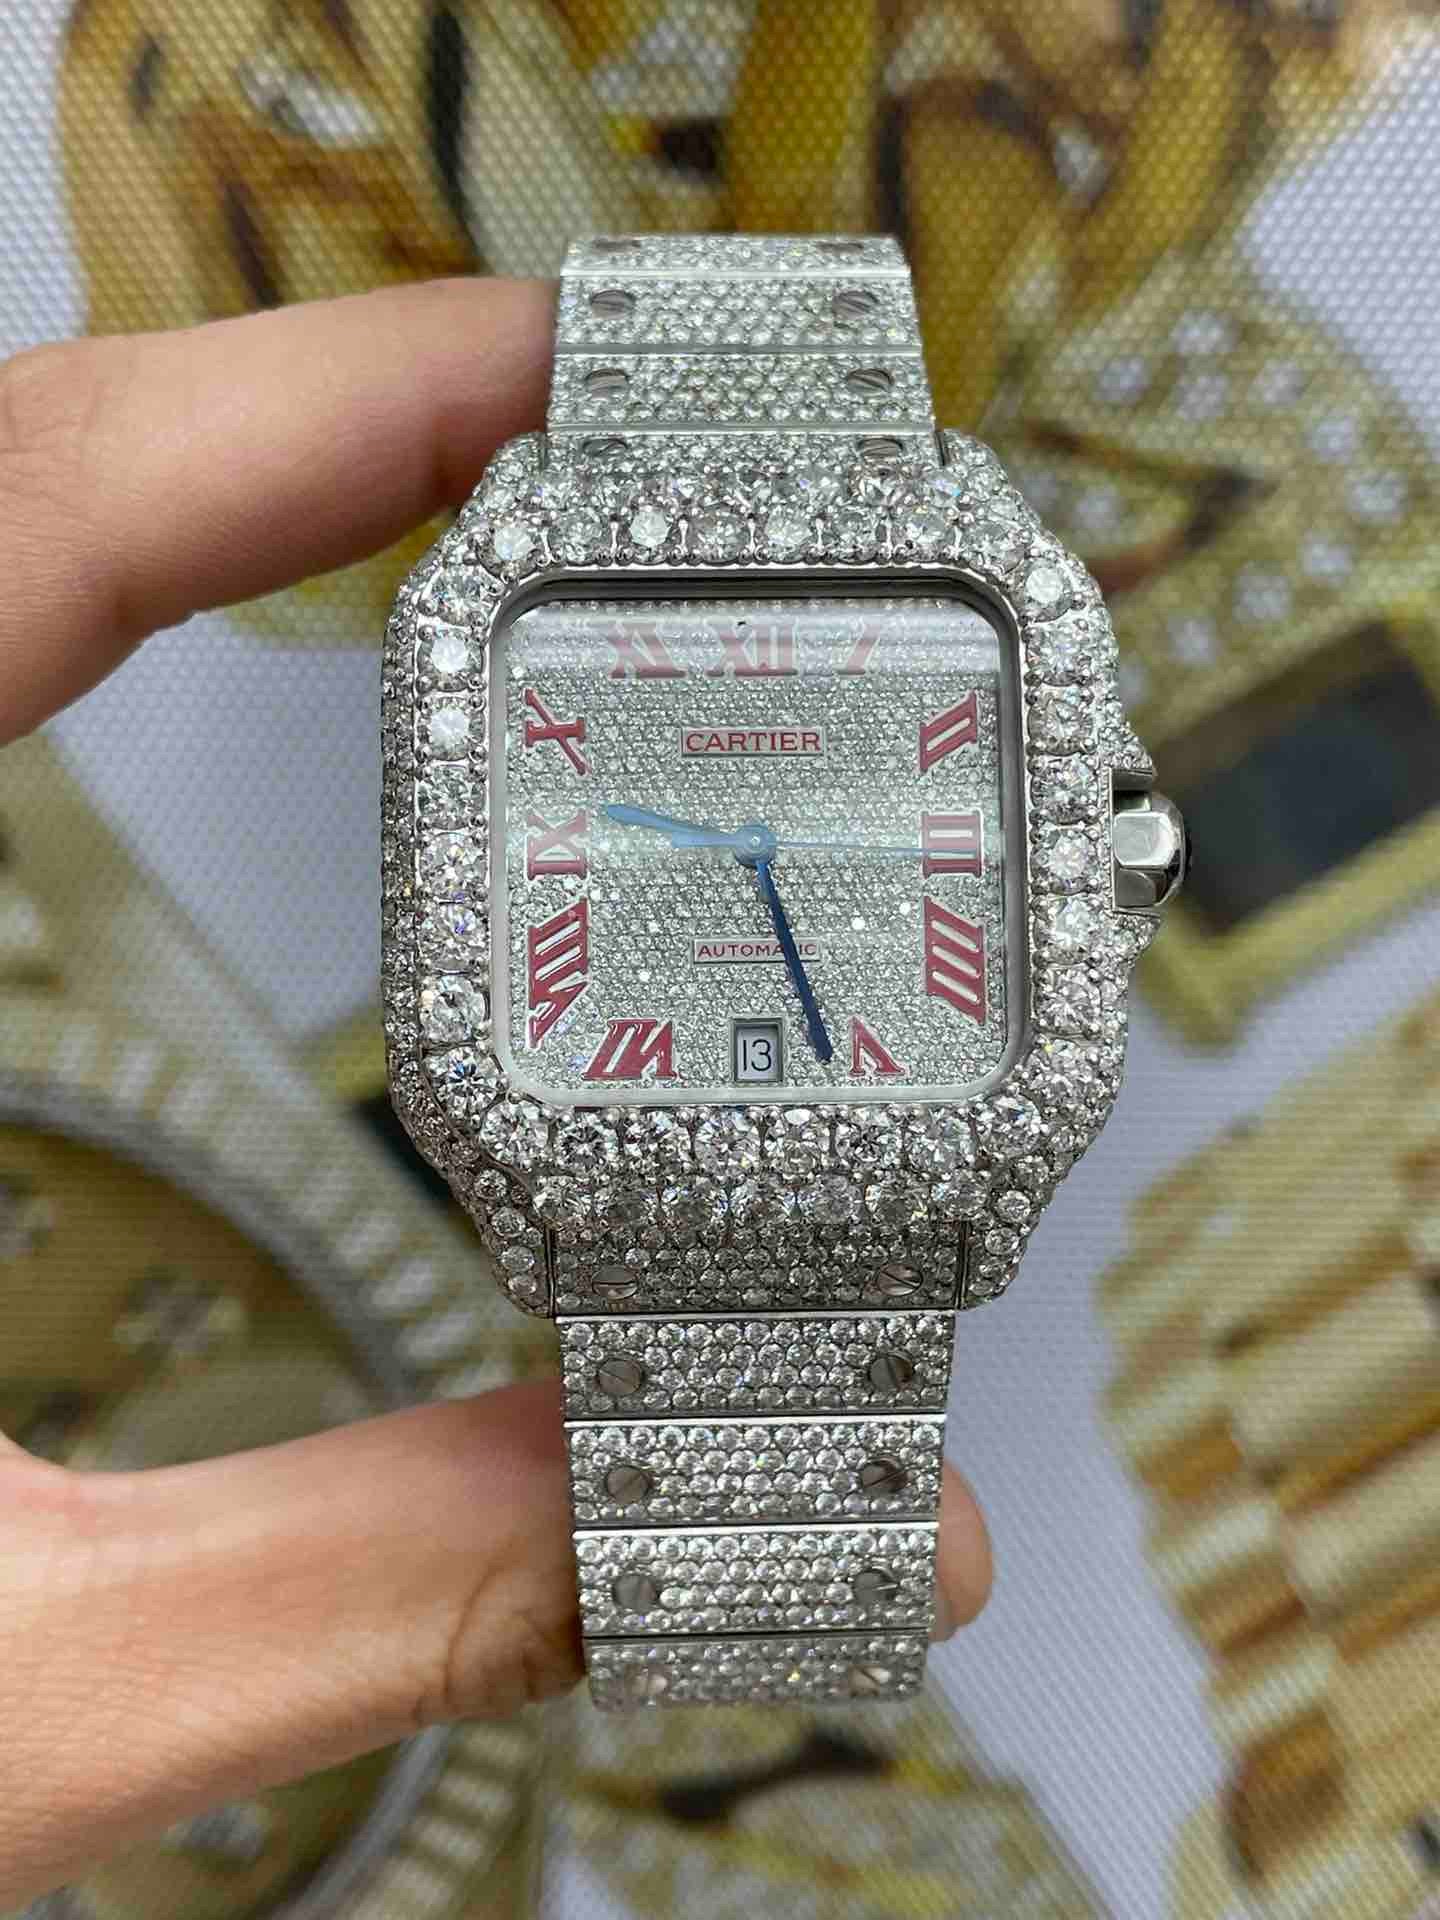 41mm Cartier Xl Vvs-1 "iced bust down" 25 cts "Avalanche" iced out watch